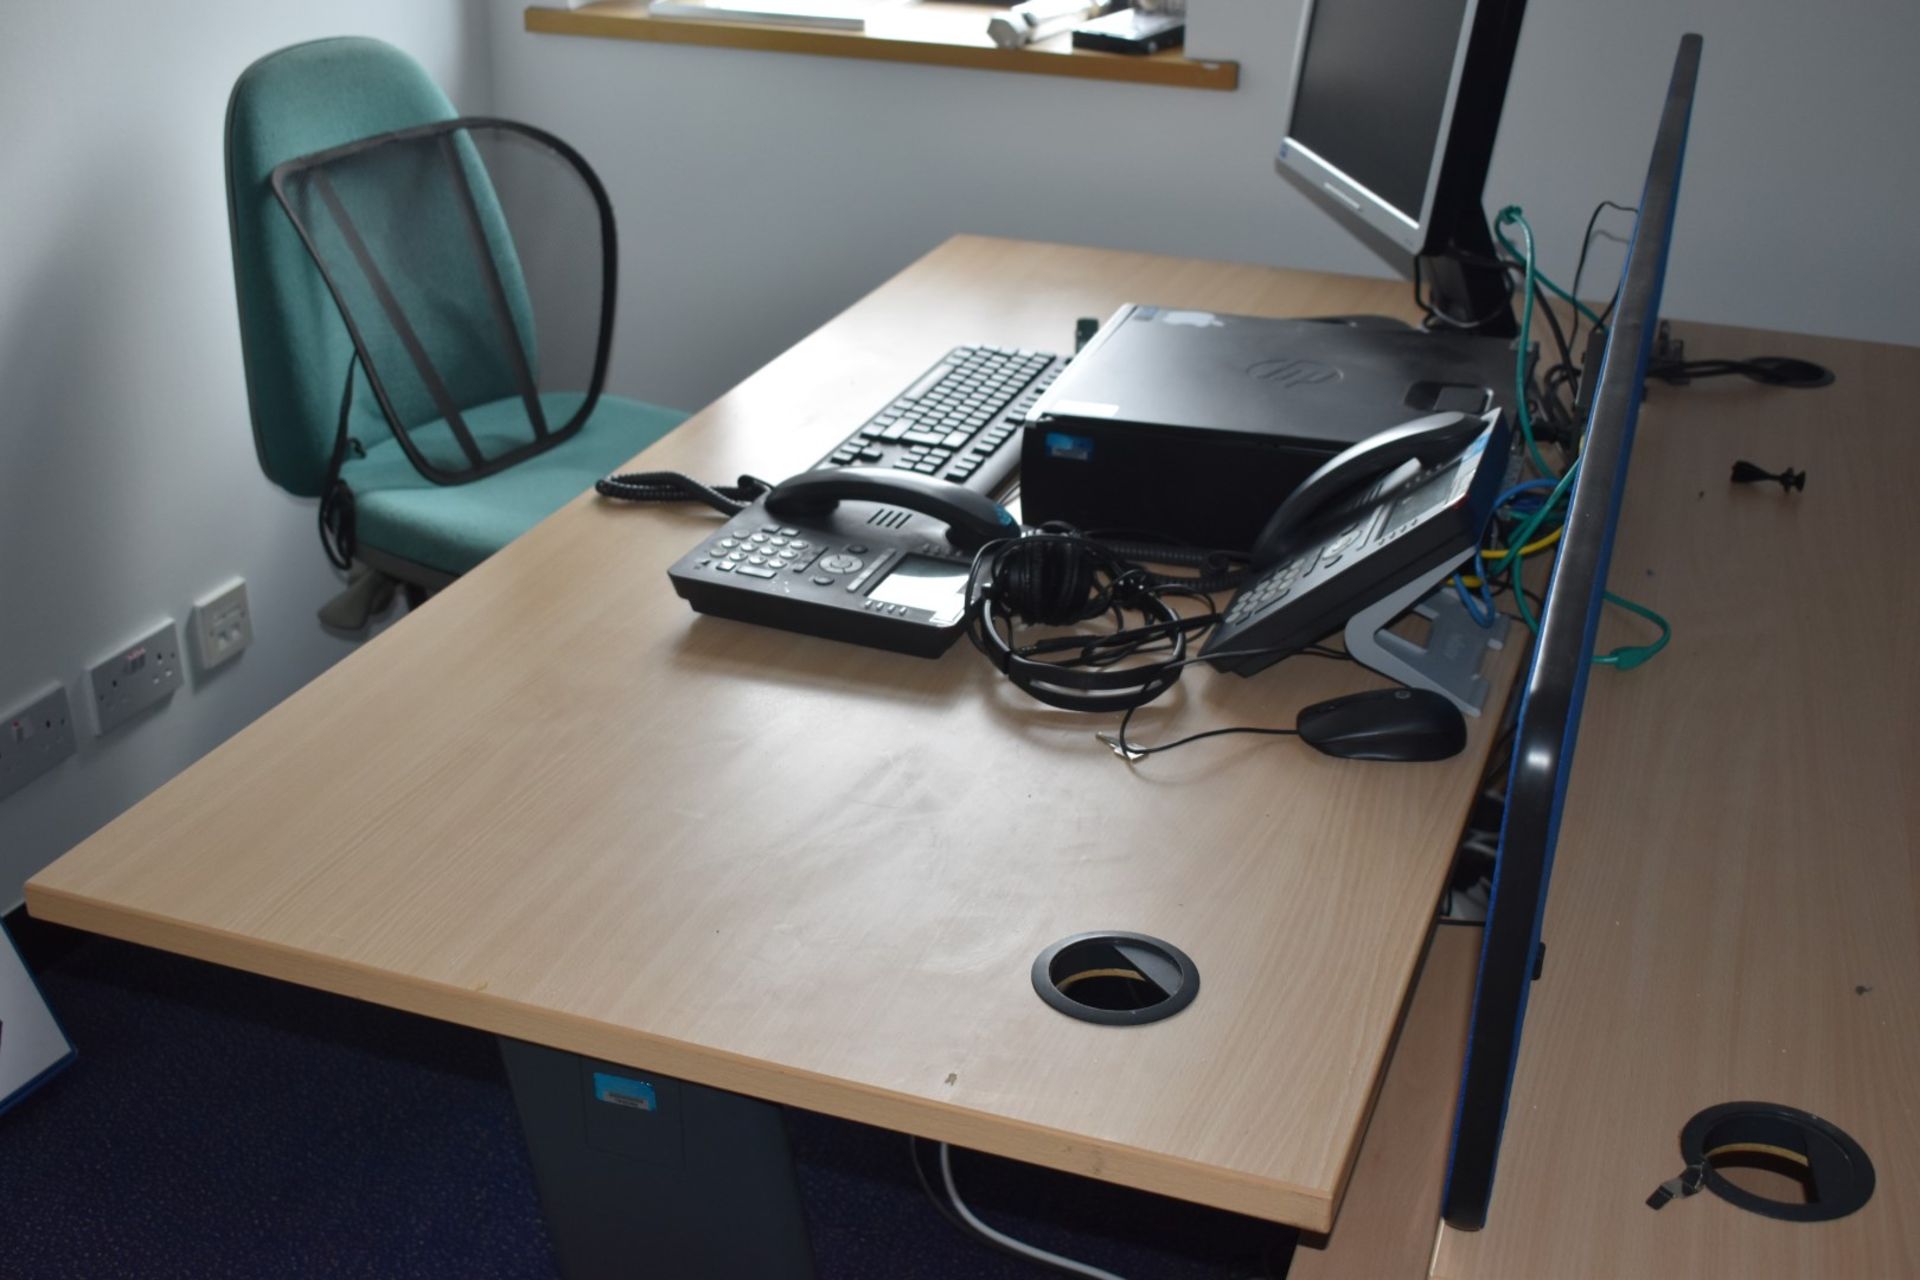 1 x Assorted Collection of Office Furniture - Includes 2 x 160cm Office Desks, 3 x Swivel Chairs, - Image 6 of 7